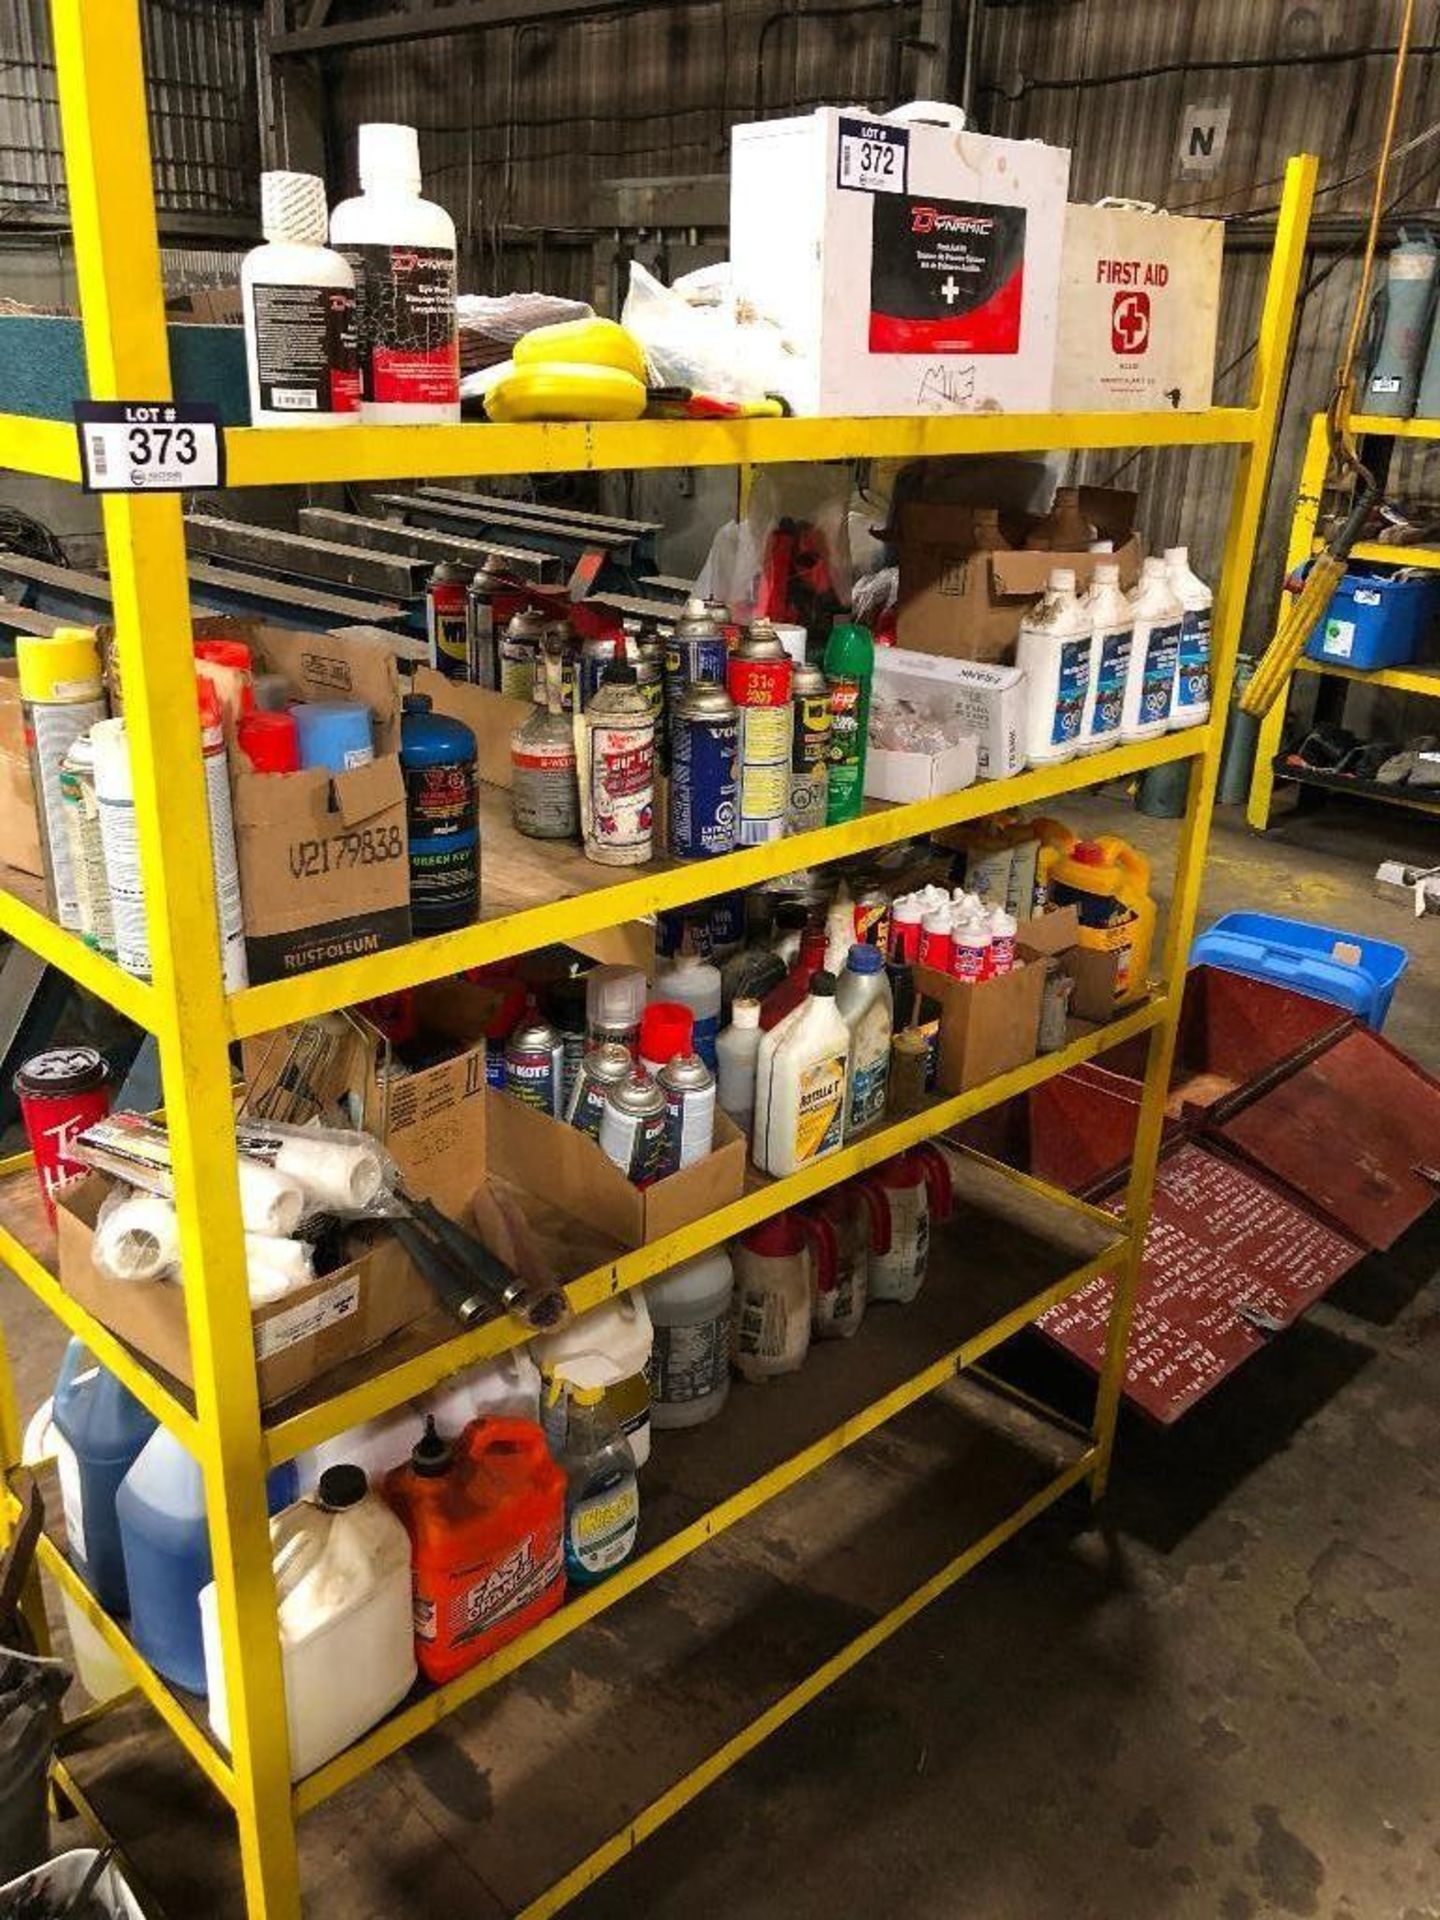 Contents of Shelving including First Aid Kits, CPR Pocket Masks, Eye Wash, Spray Paint, Paint Roller